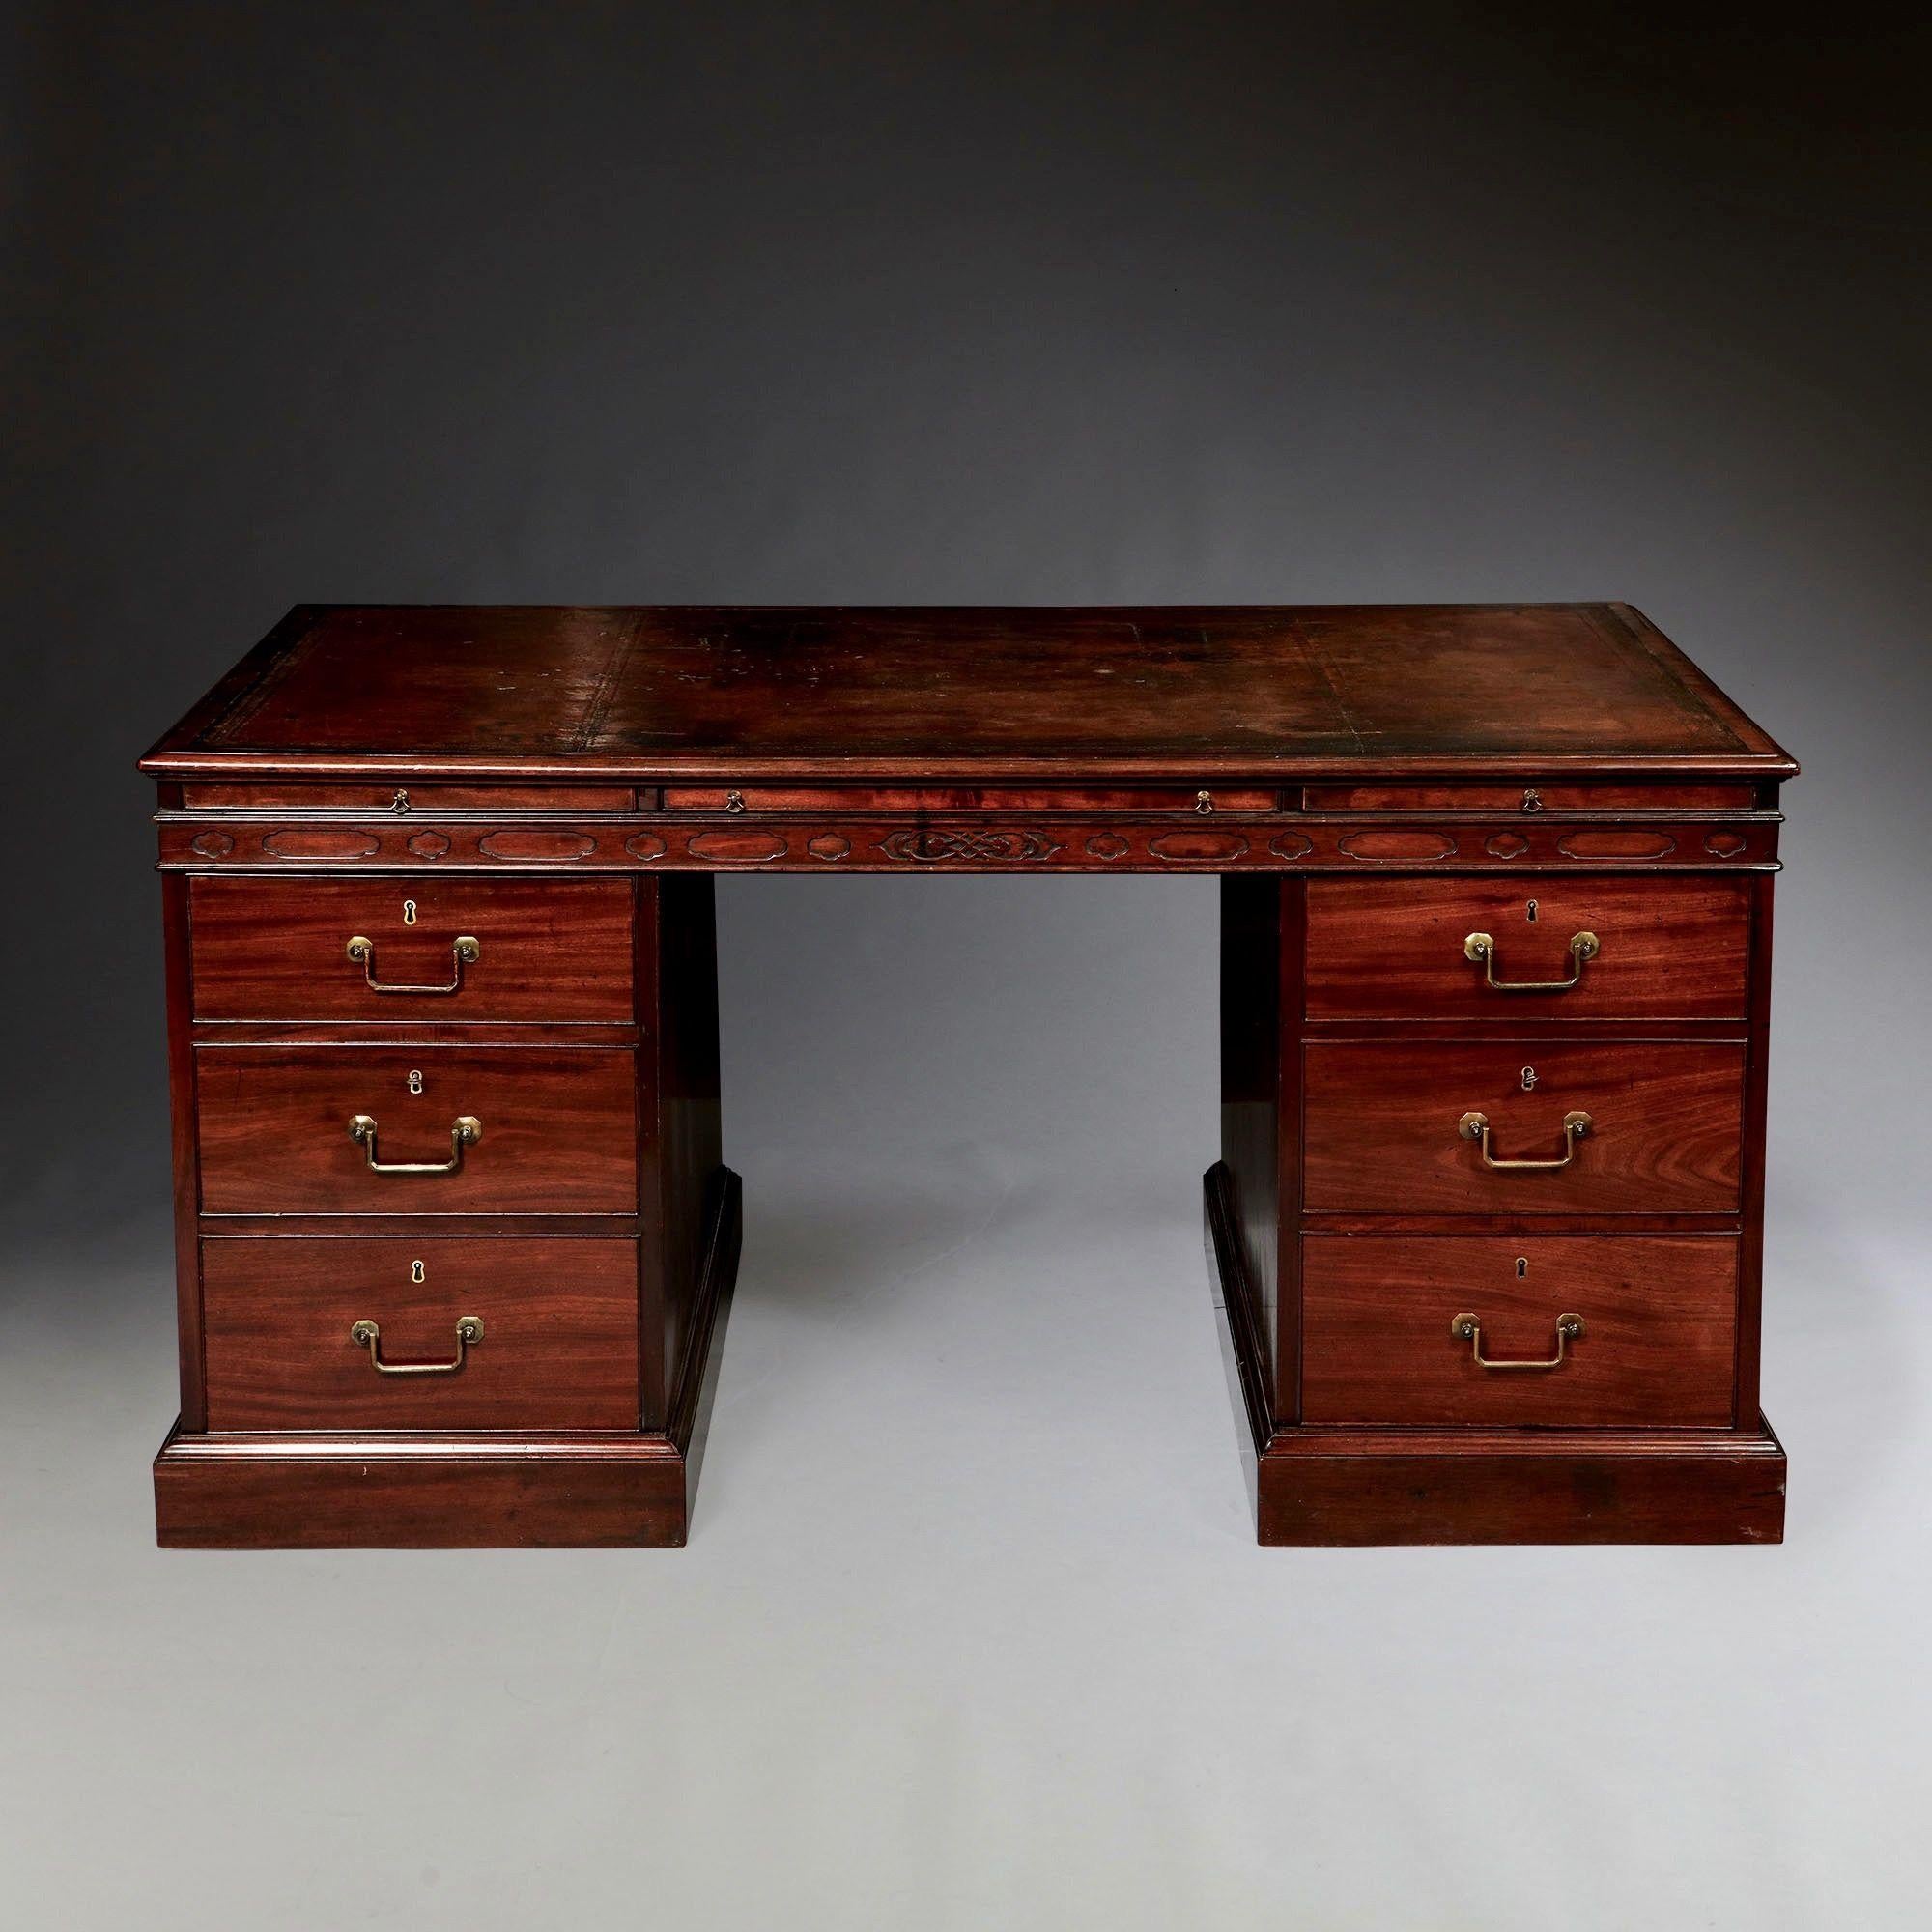 George III 18th Century mahogany partners desk concealing twenty-four small drawers. In the manner of Thomas Chippendale. 

The original sectioned and tooled leather top sits above two short and three long quill/pen drawers to each side neatly